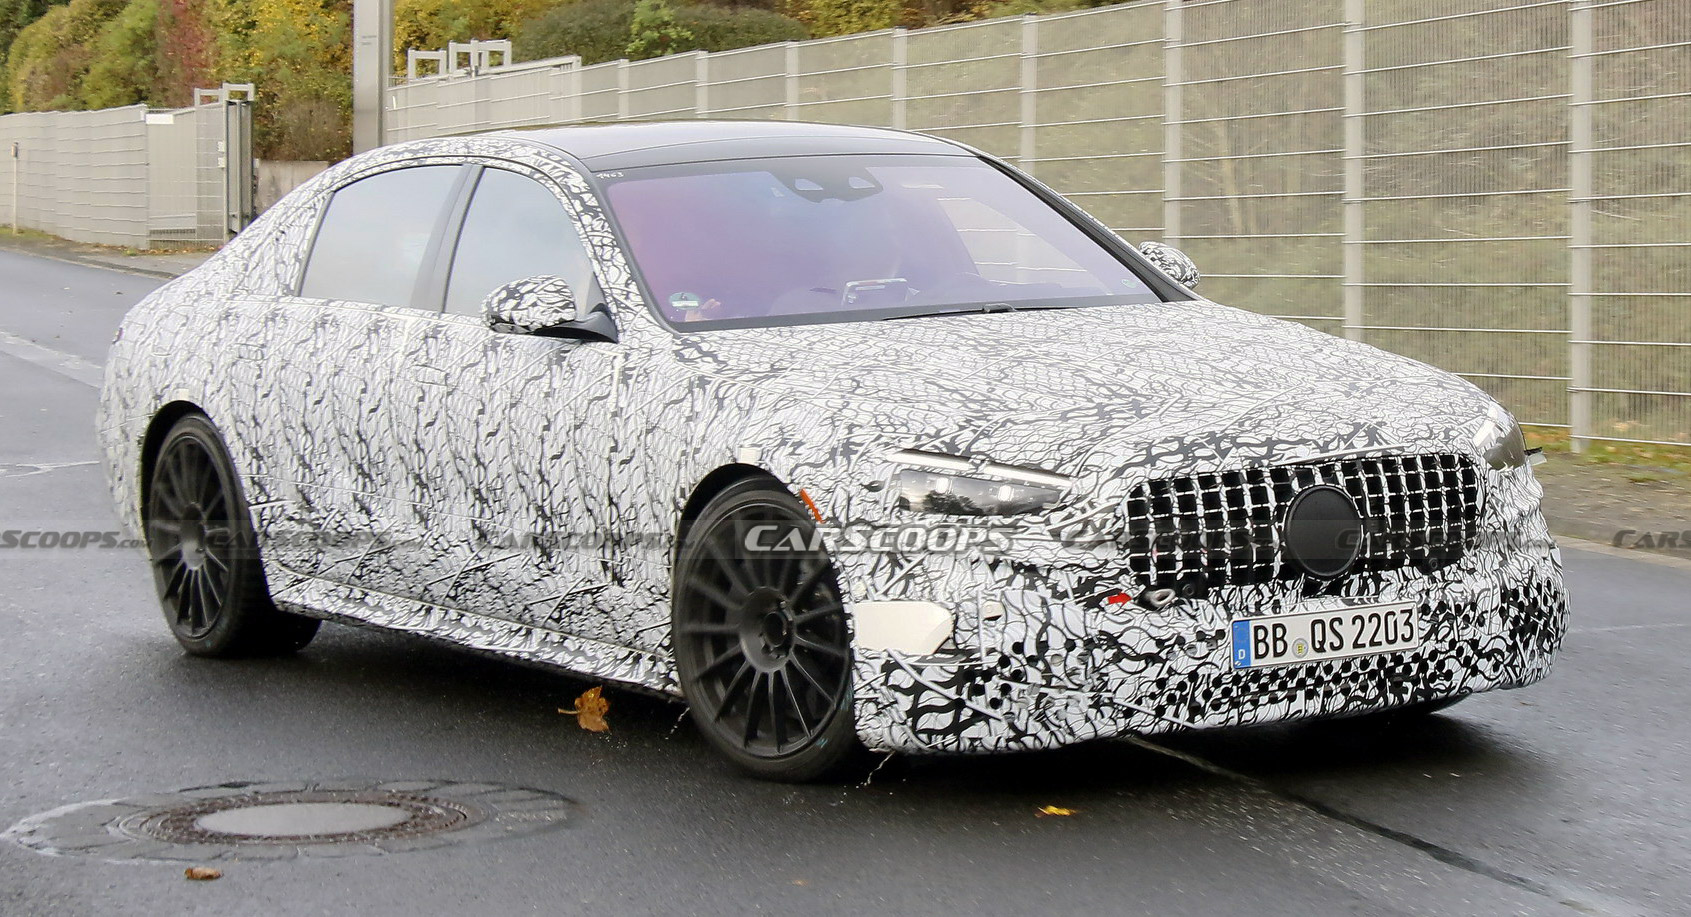 22 Mercedes Amg S63e More Spy Shots Of The Electrified 700 Hp Luxury Missile Carscoops